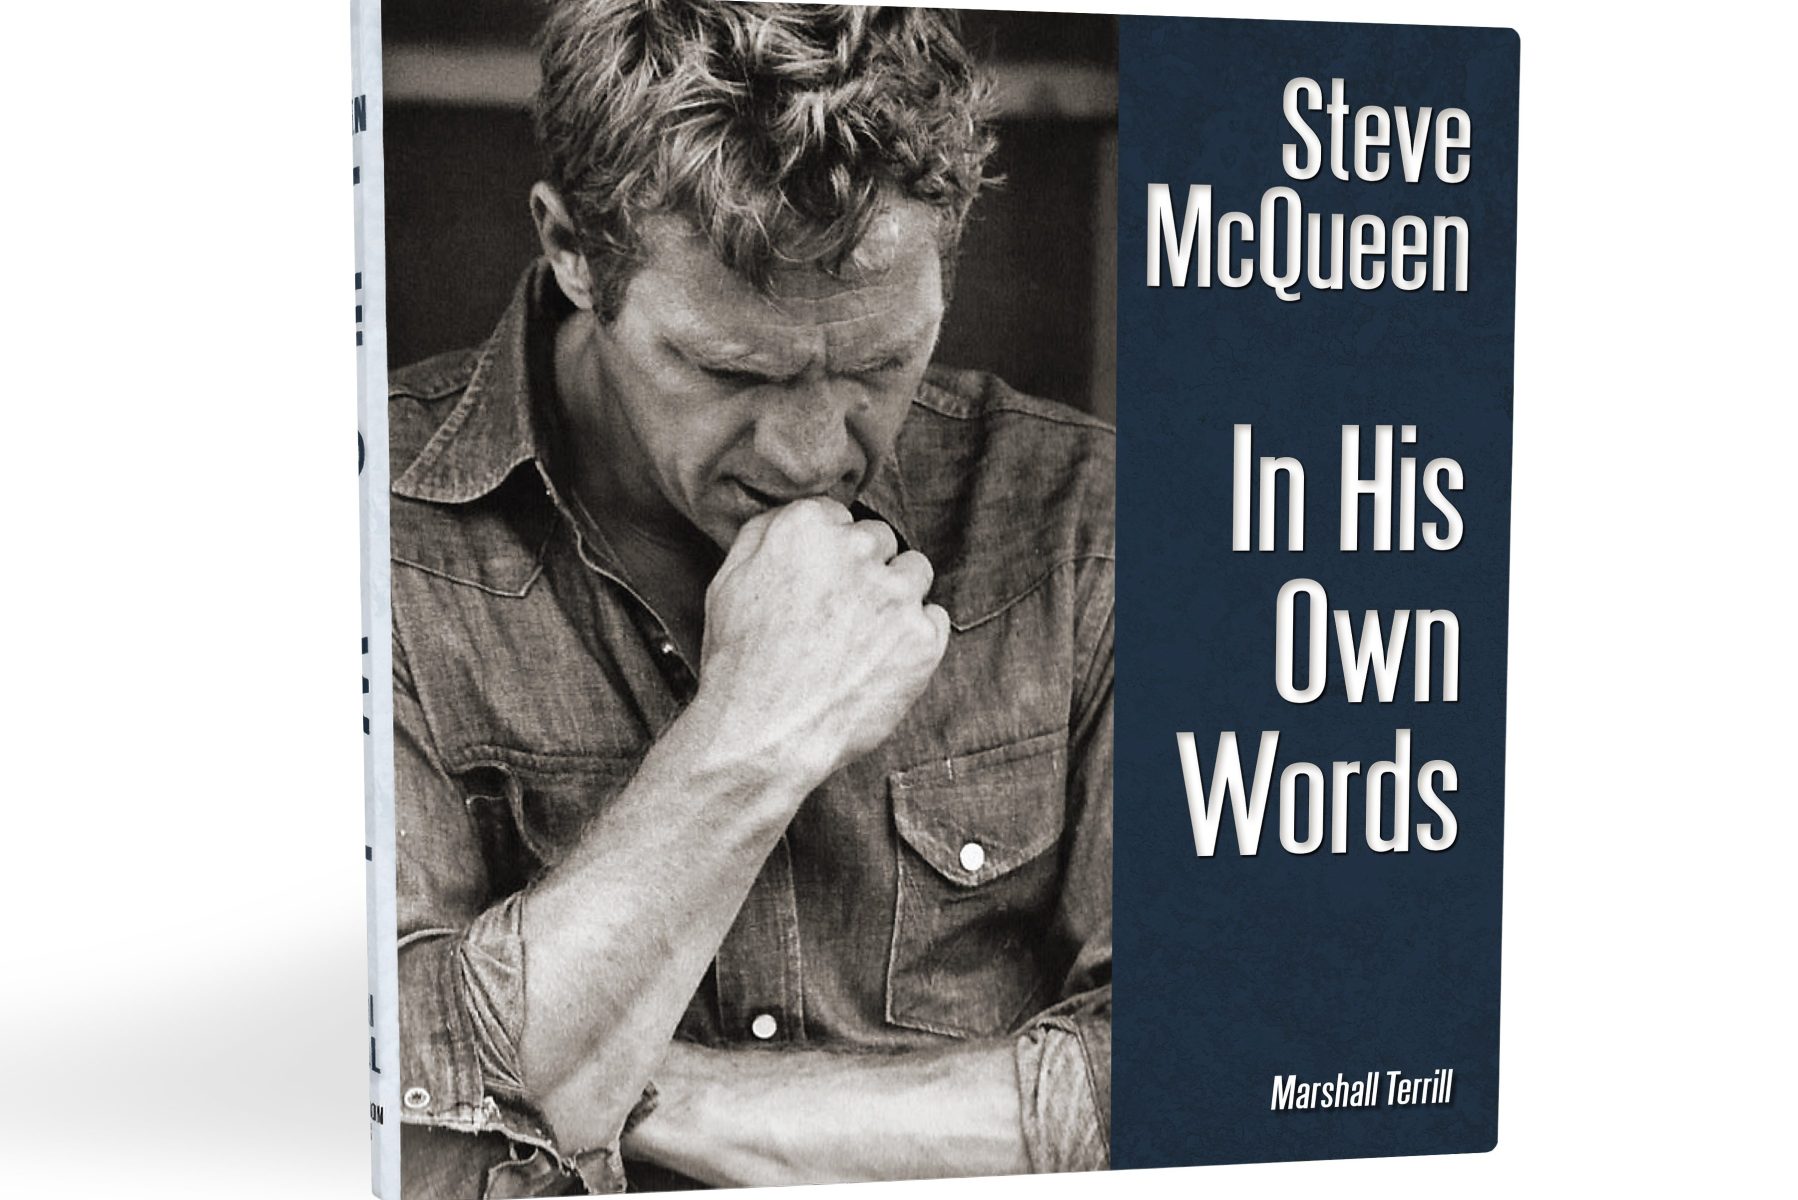 <p><a href="https://twitter.com/MarshallTerrill?ref_src=twsrc%5Egoogle%7Ctwcamp%5Eserp%7Ctwgr%5Eauthor">Marshall Terrill</a>, the author of six previous books about Steve McQueen, is putting out a seventh to honor of the 40th anniversary of the beloved actor’s death on November 7th. <a href="https://bookshop.org/books/steve-mcqueen-in-his-own-words/9781854432711"><em>Steve McQueen: In His Own Words</em></a> contains 450 quotations from McQueen himself alongside more than 500 photographs from McQueen’s early life and movie career, many of which have never been released until now. Today, we've got sneak peek at eight of those photos that span McQueen's life and career, along with some background notes from Terrill to help us better understand what drove the man who would become forever known as The King of Cool.</p>